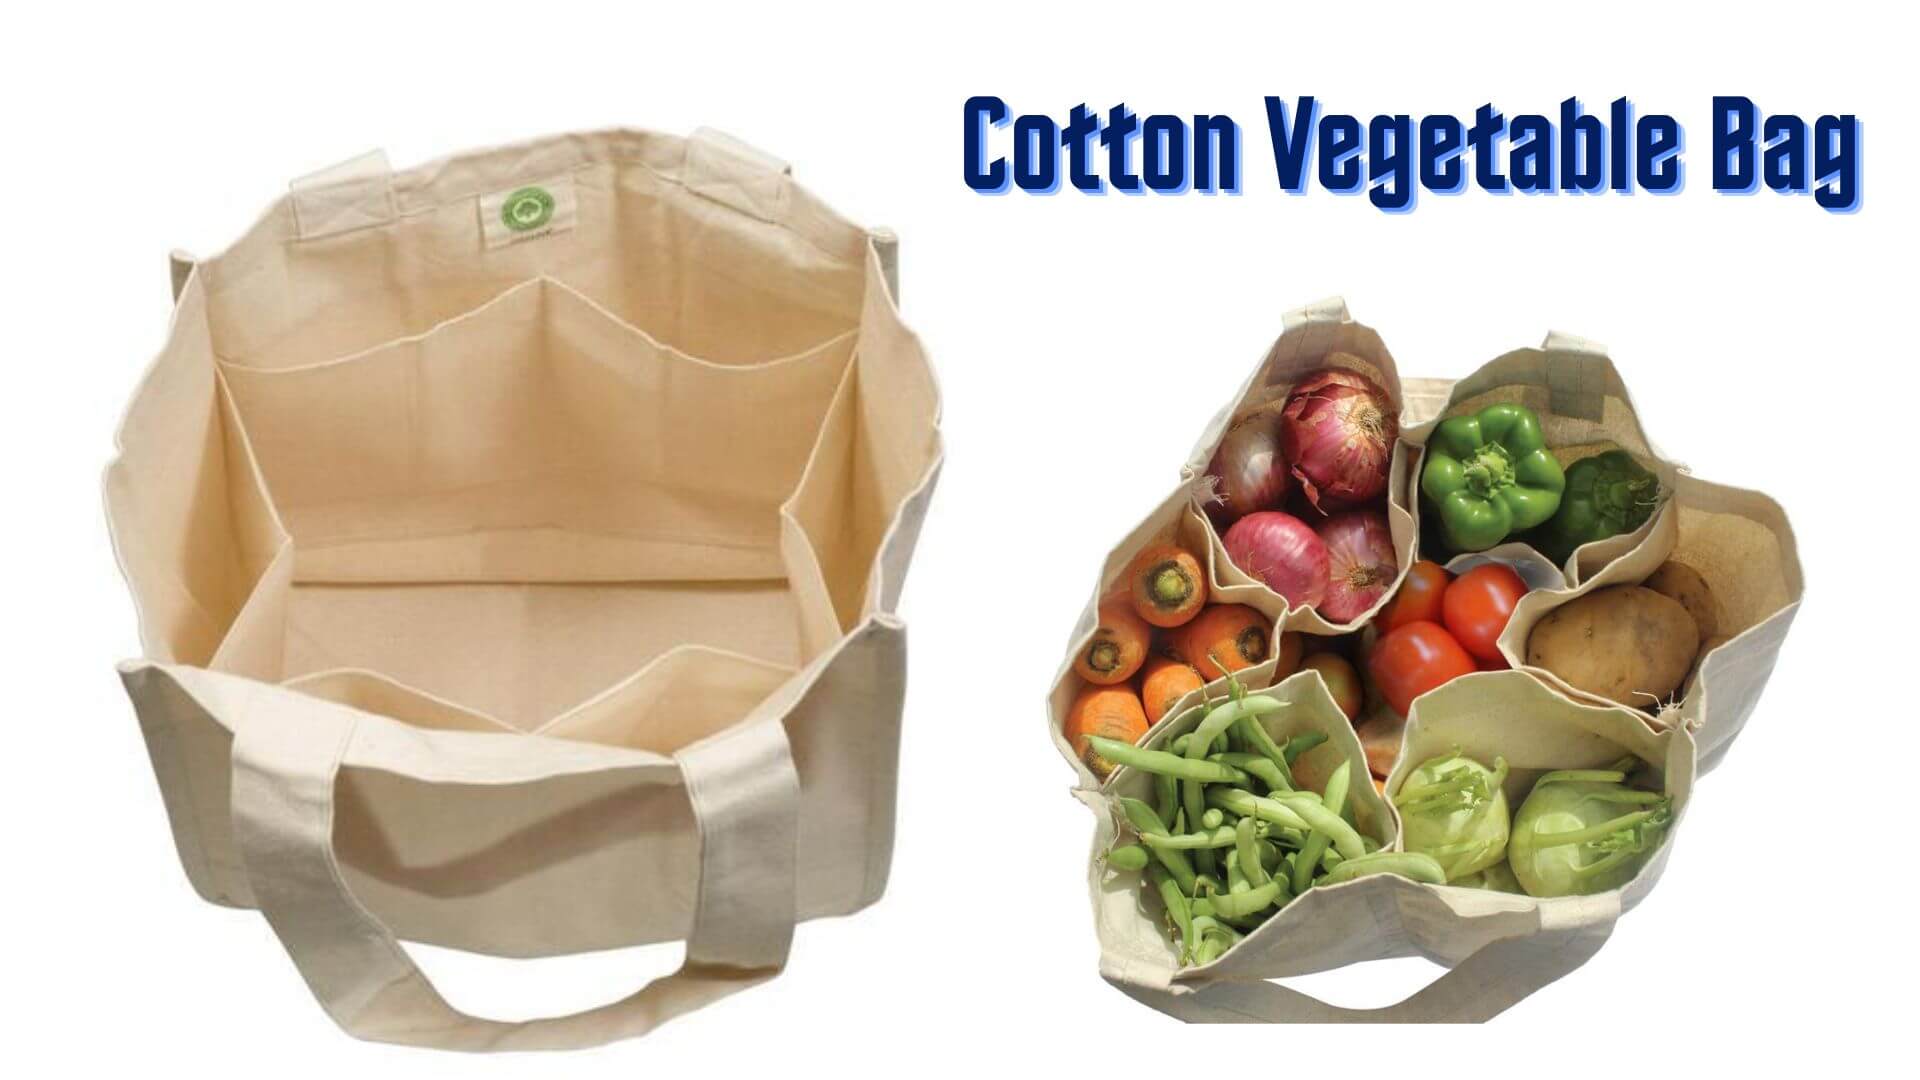 Cotton Vegetable Bag with Six Compartments